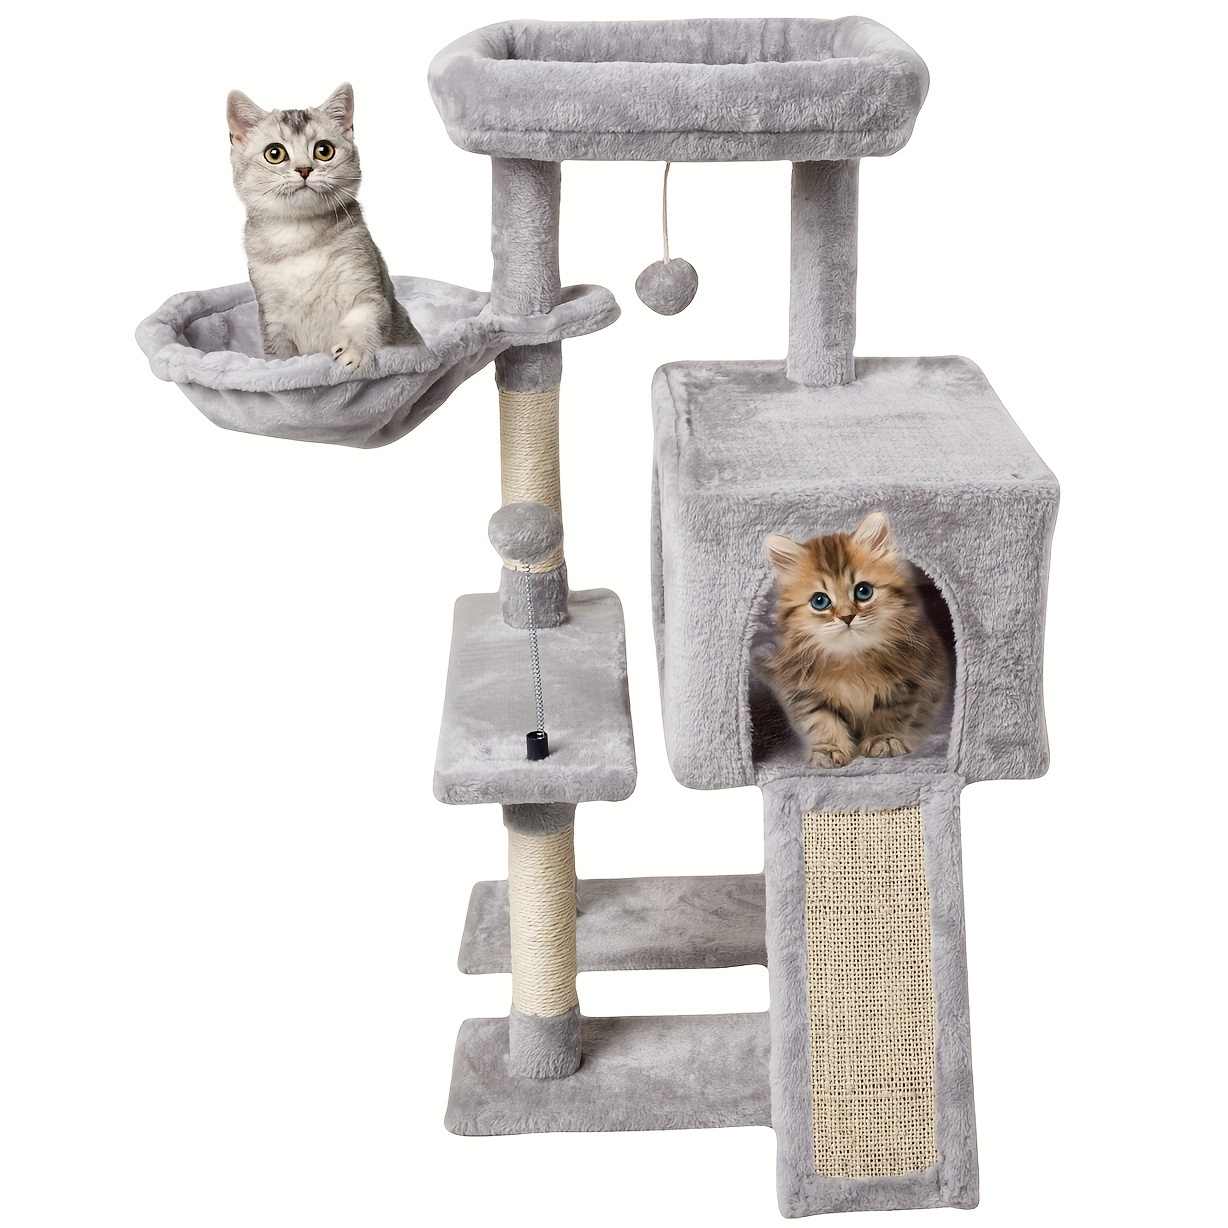 

Paw Rainbow Cute Cat Tree Tower For Indoor Cats- Condo With Sisal Scratching Posts, Jump Platform Cat Furniture Activity Center Play House Bed